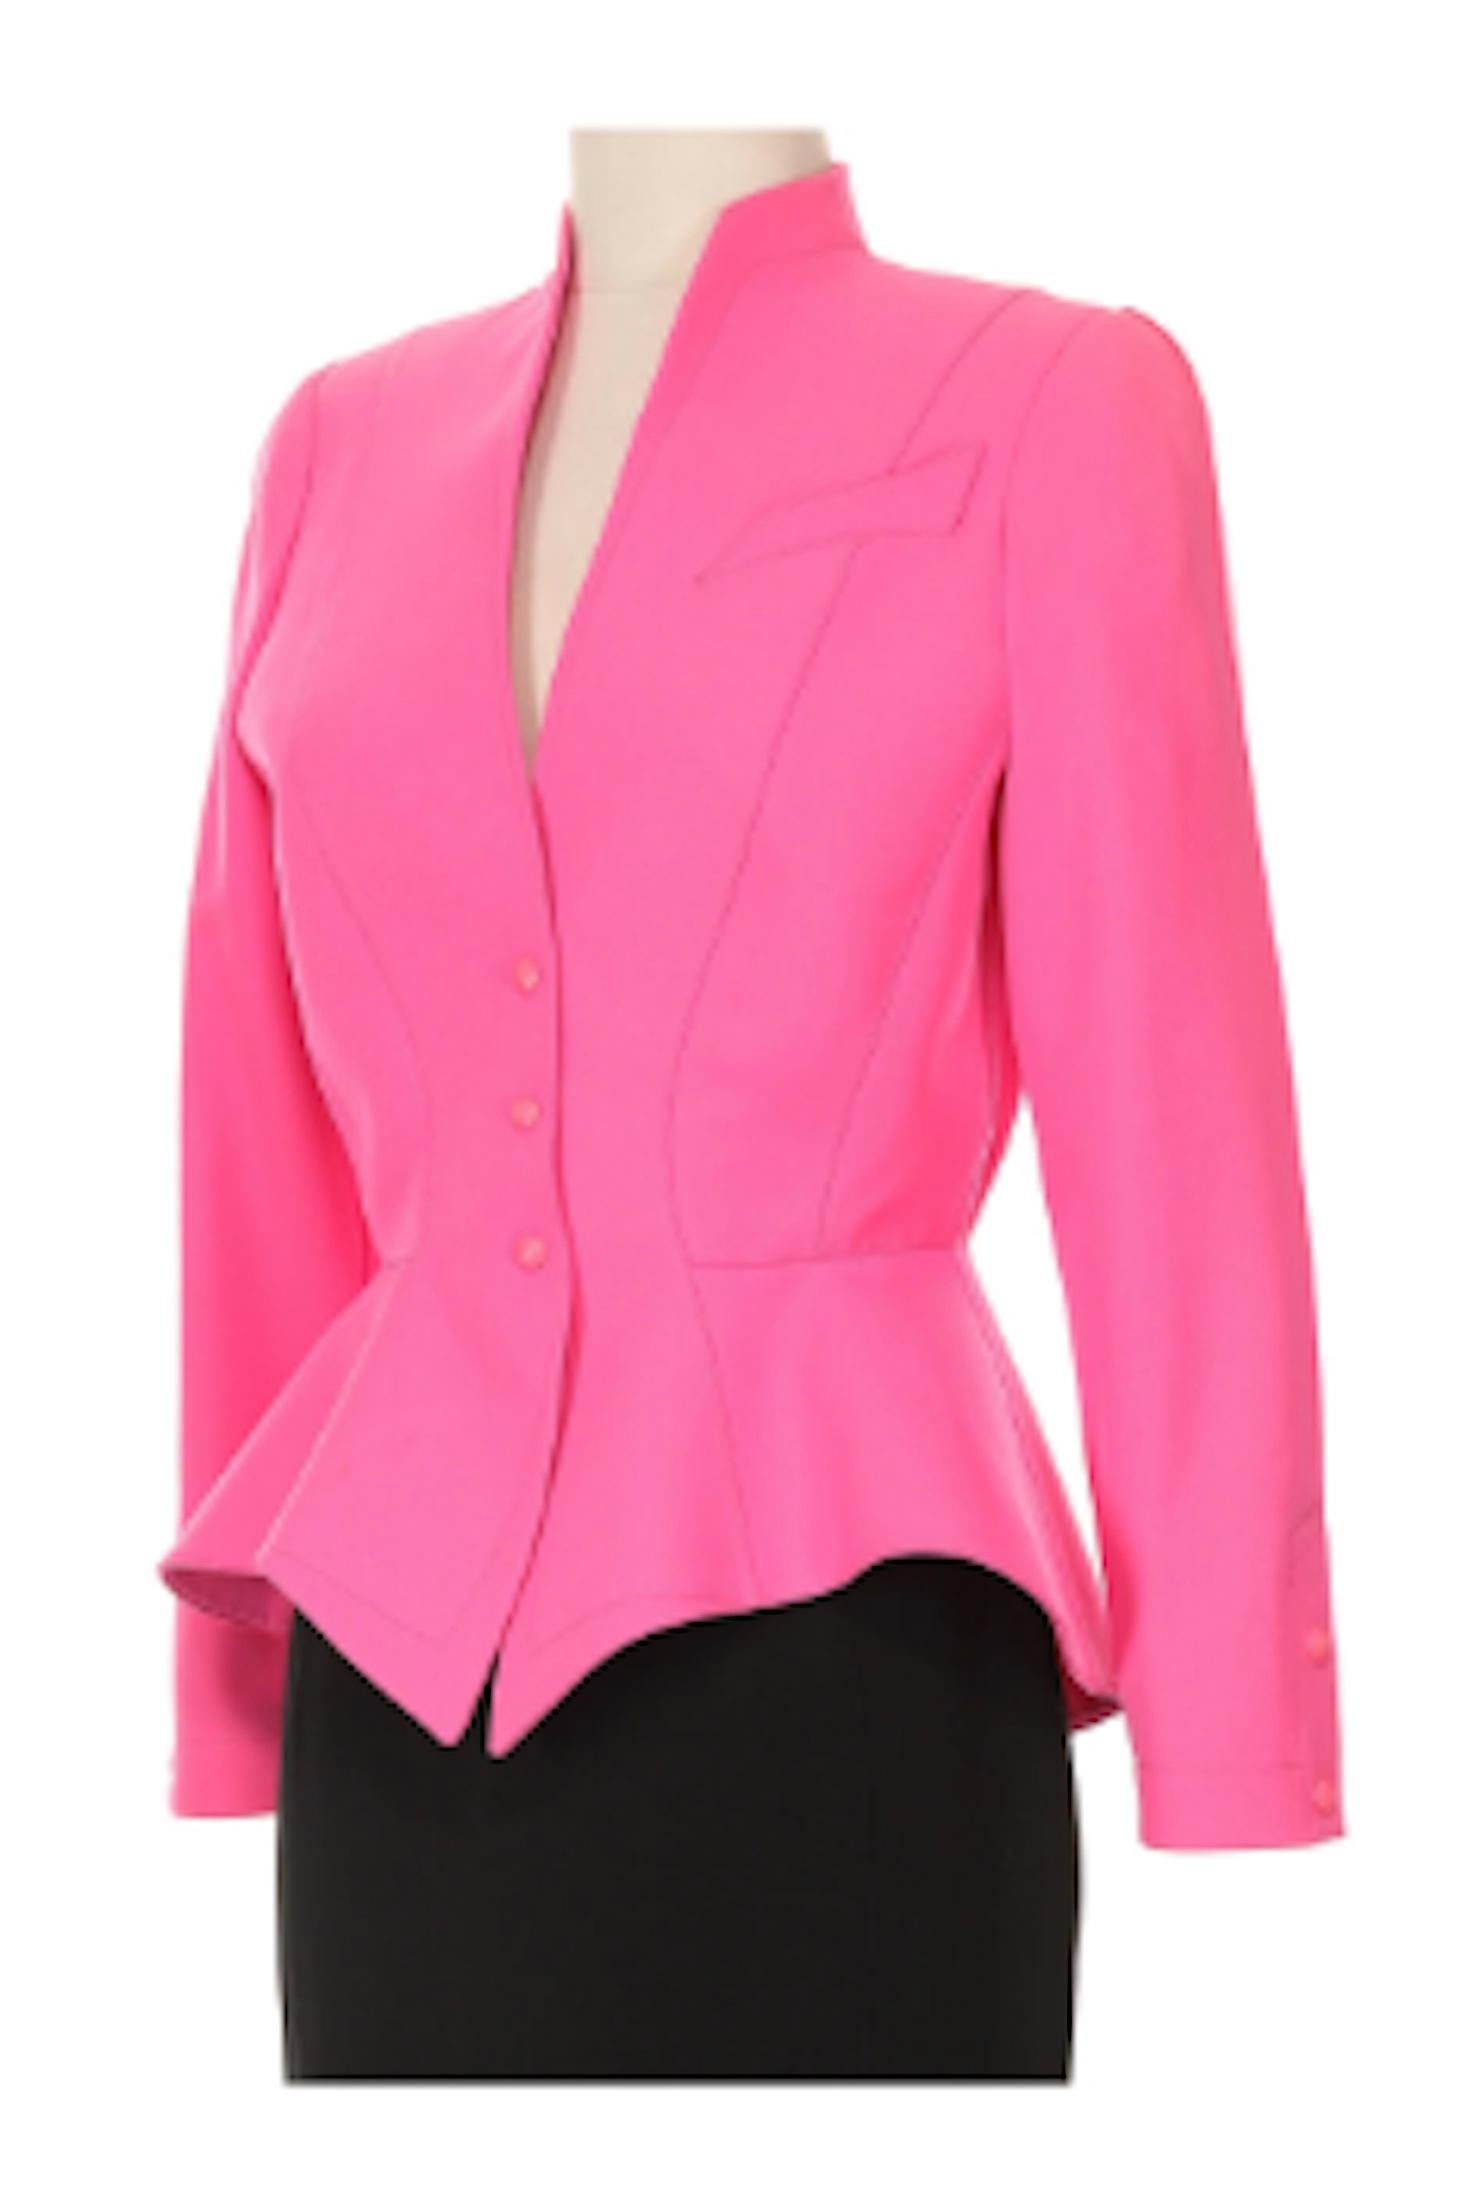  Thierry Mugler Hot Pink Jacket and Black Mini Skirt Circa 1980's.Vibrant pink jacket with signature pointed details and back mini skirt with hidden zipper closure.

- Monochromatic snap buttons 
- 100% wool and 100% polyester lined
- Size FR 36
-